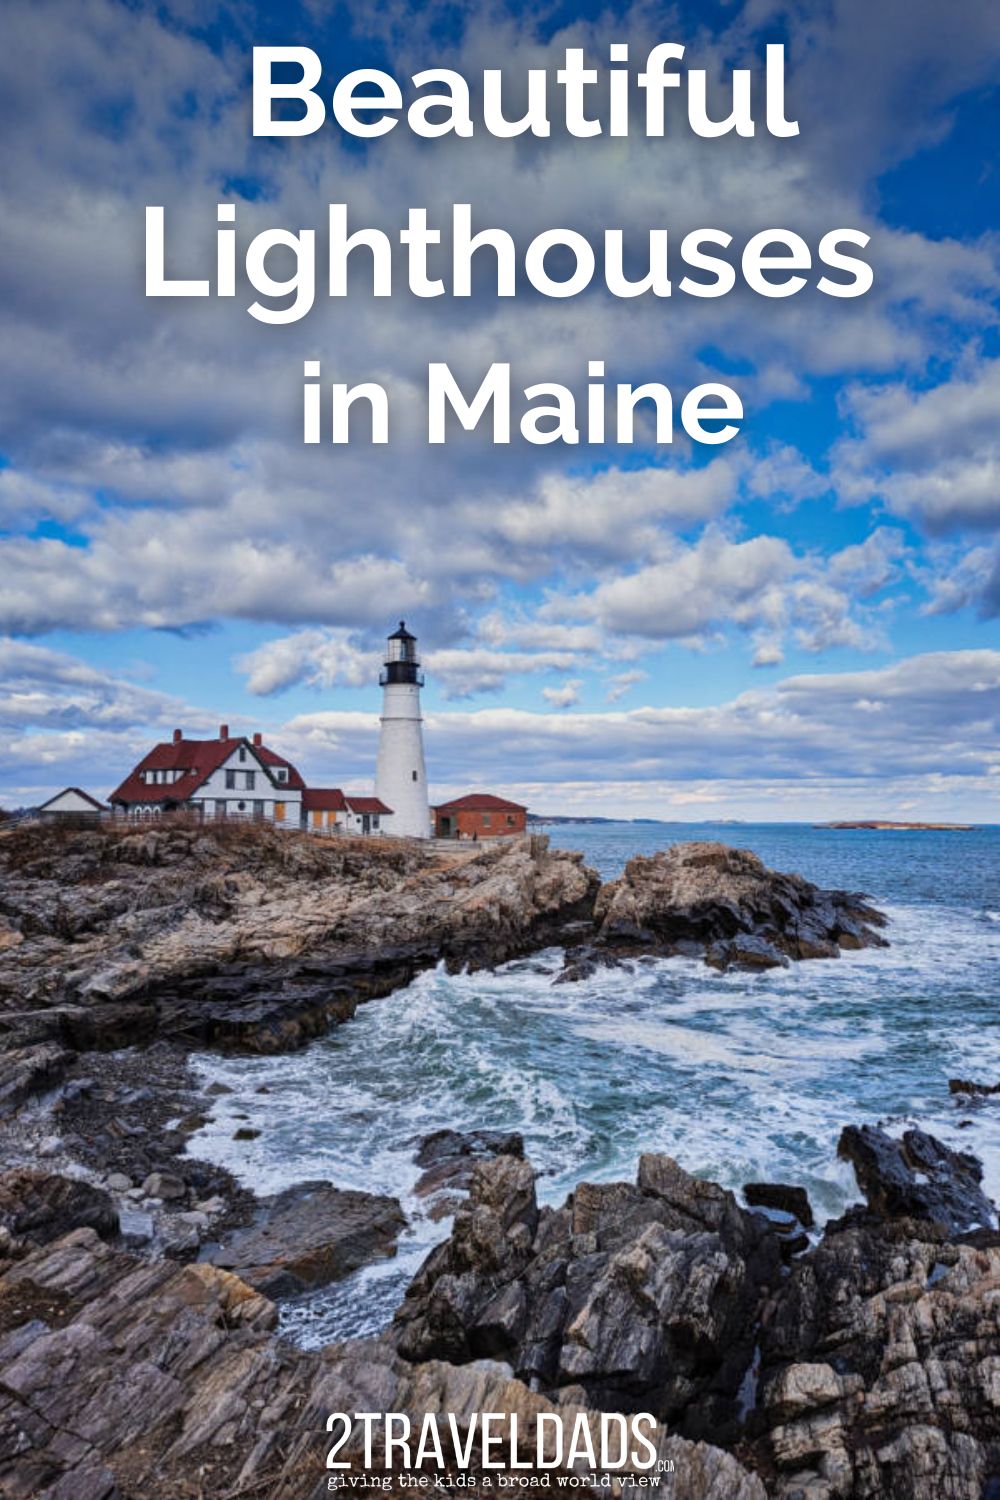 Easy to visit lighthouses in Maine are all along the coast. From the famous Portland Head Light to lesser know sites that are even more beautiful, these are the best lighthouses to add to your Maine road trip.